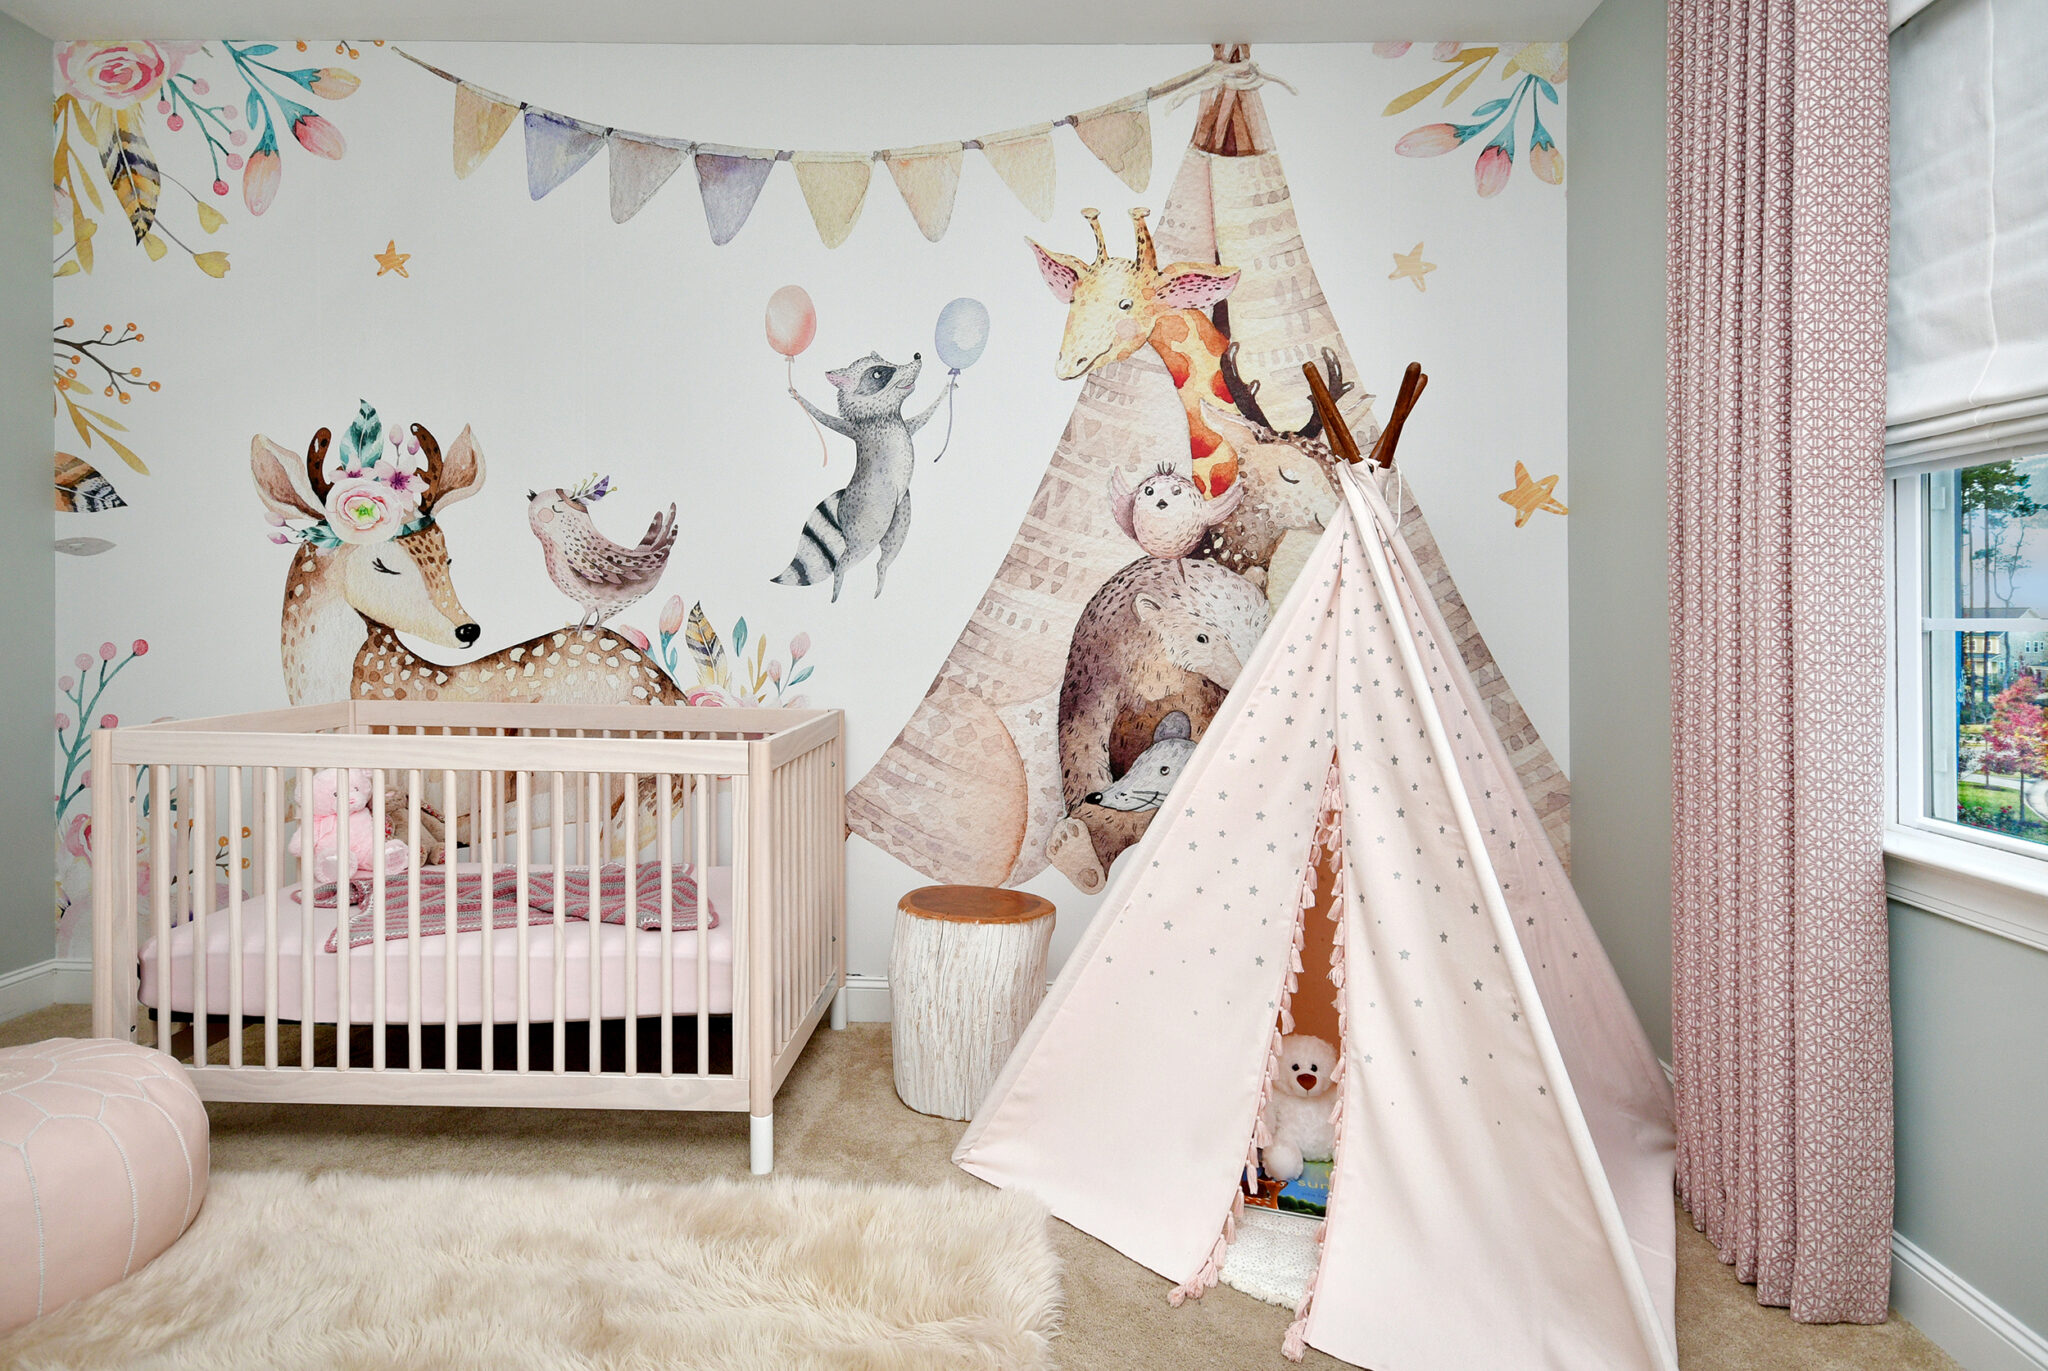 DECORATING A CHILD’S ROOM